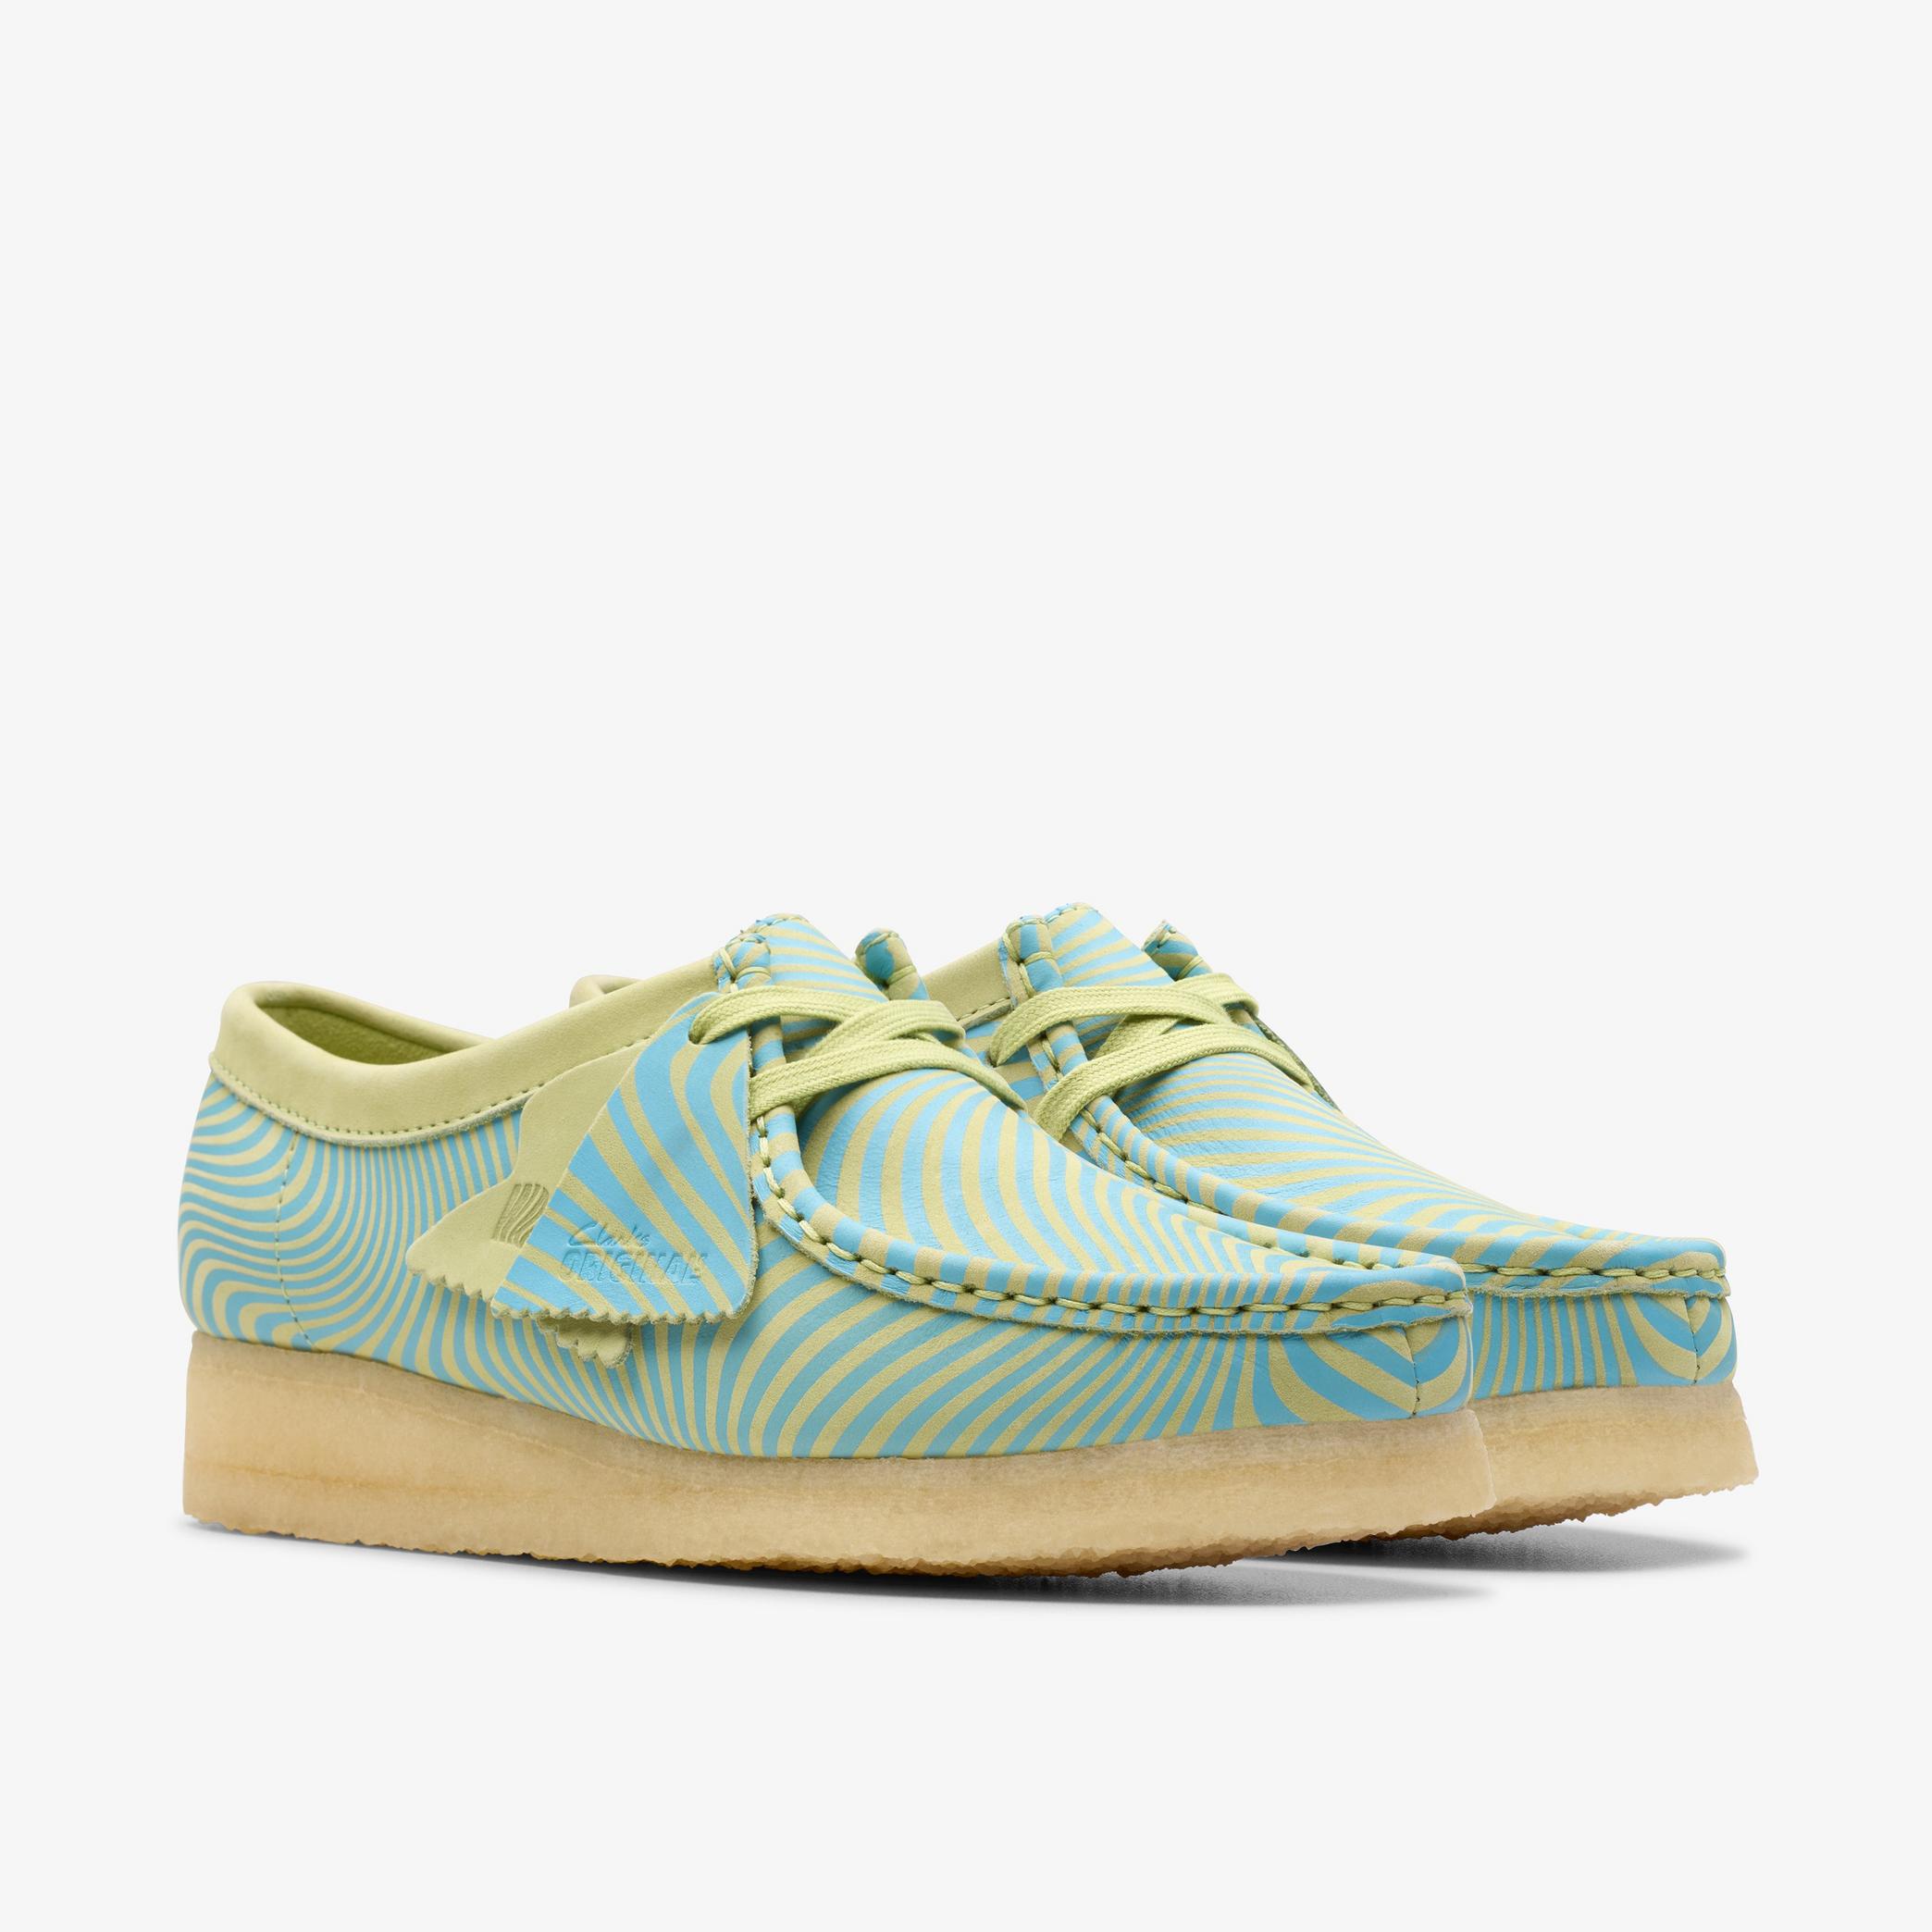 Wallabee Blue/Lime Print Wallabee, view 4 of 7